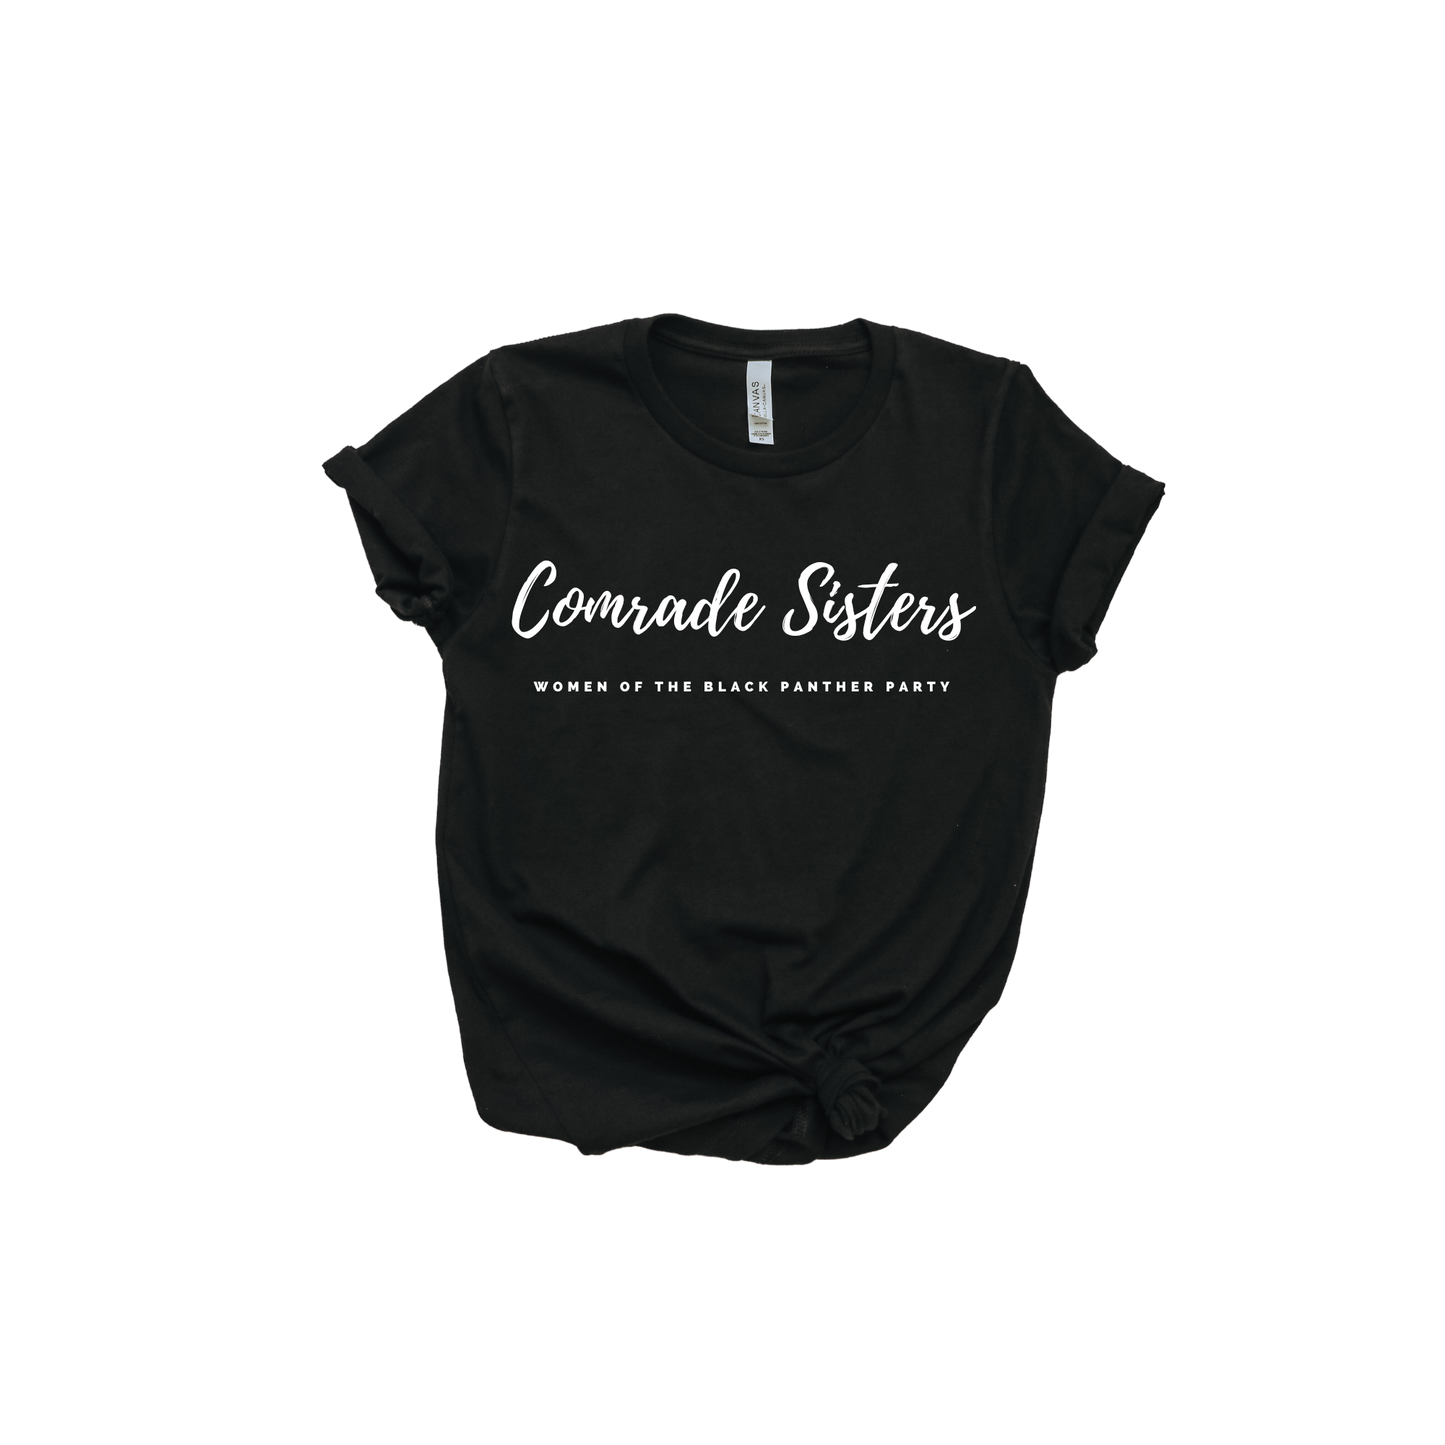 Commemorative Comrade Sisters Women of the Black Panther Party T-Shirt